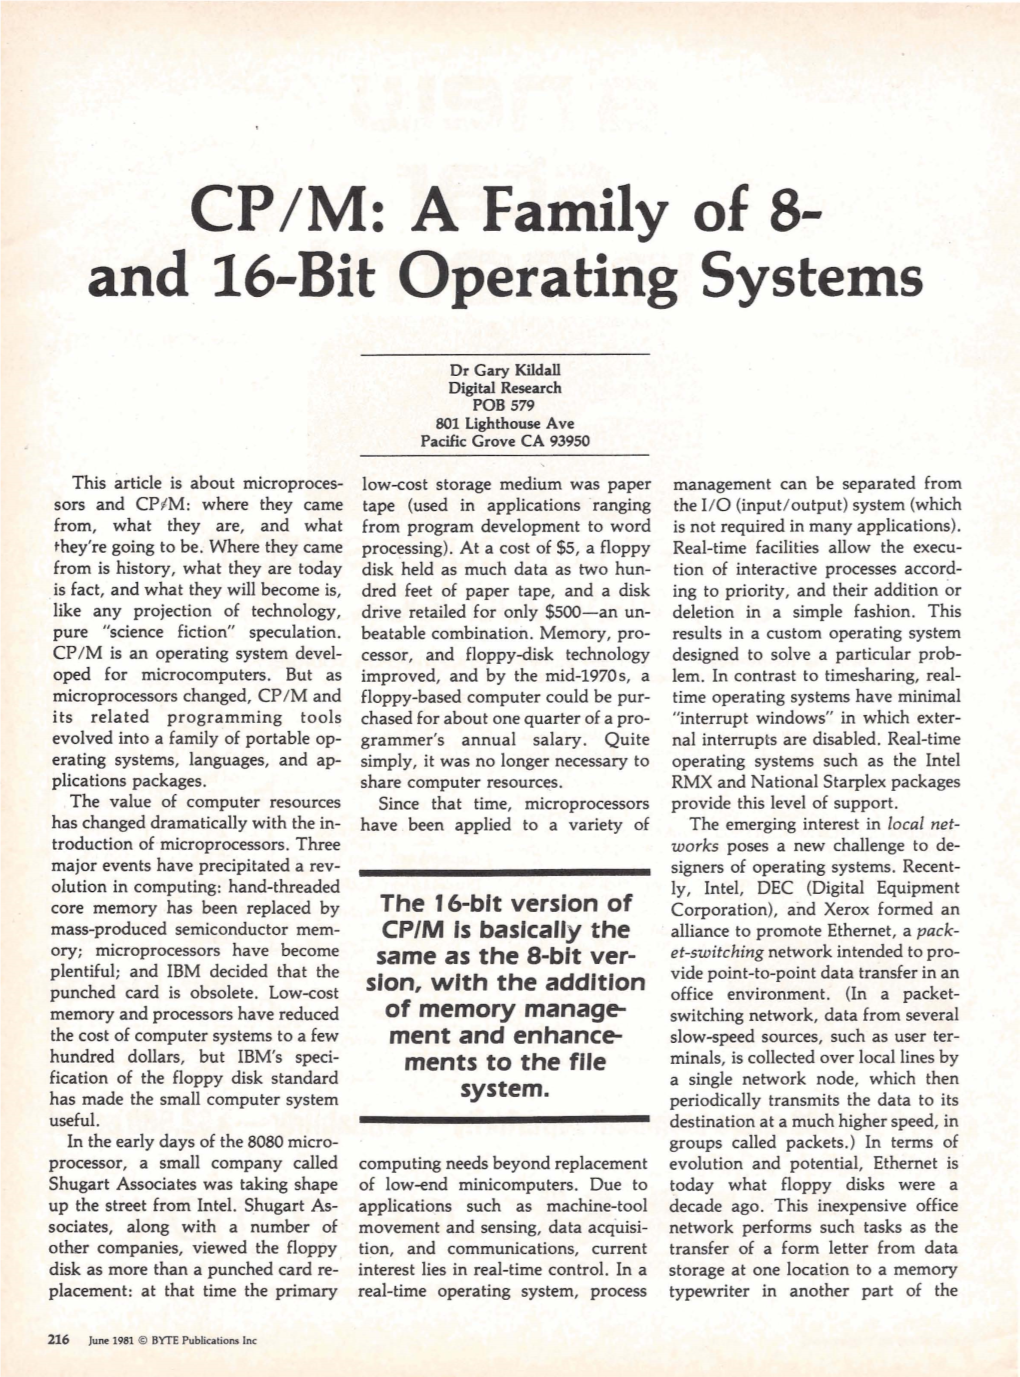 CP/M: a Family of 8- and 16-Bit Operating Systems